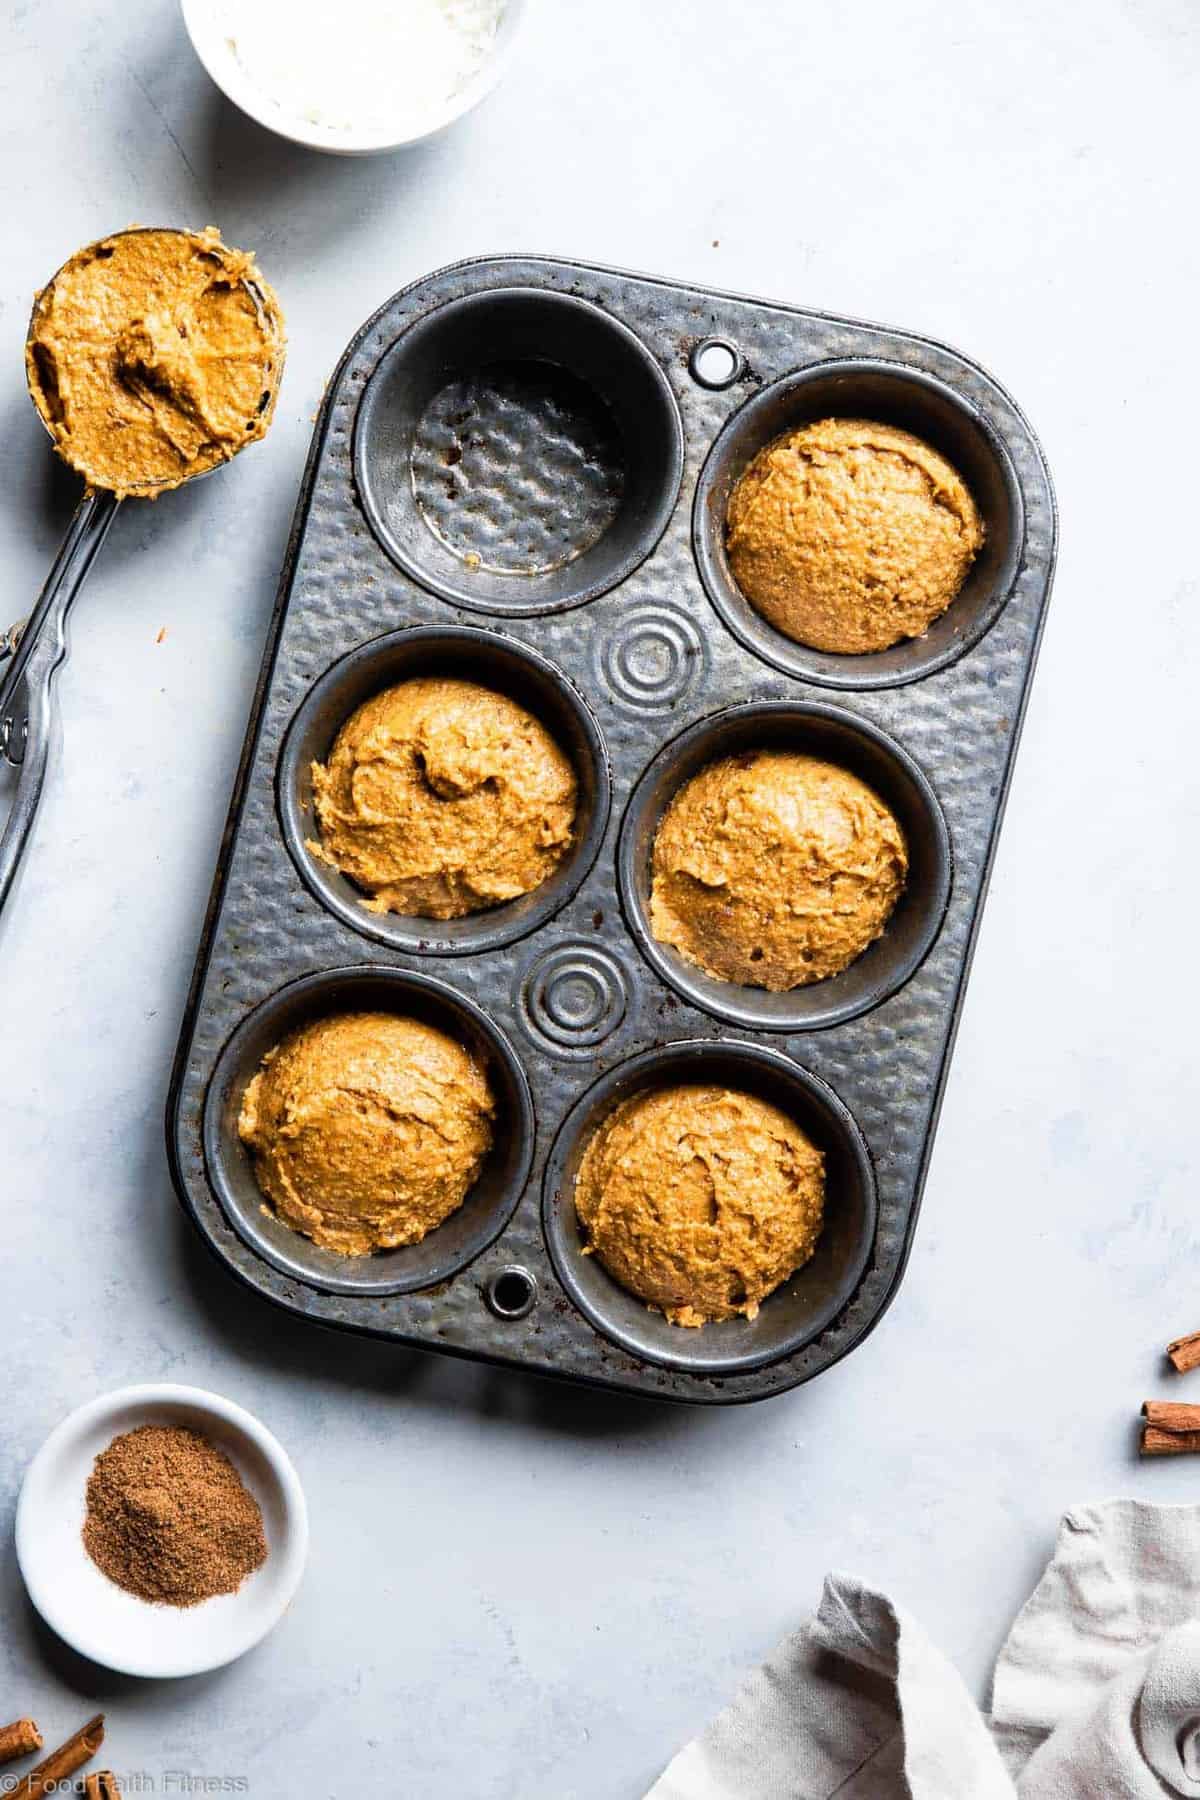 Sugar Free Gluten Free Oatmeal Carrot Muffins - These easy carrot muffins are naturally sweetened with dates and have a surprise, spicy-sweet kick! SO light and fluffy! Gluten free, healthy and tasty! | #Foodfaithfitness |